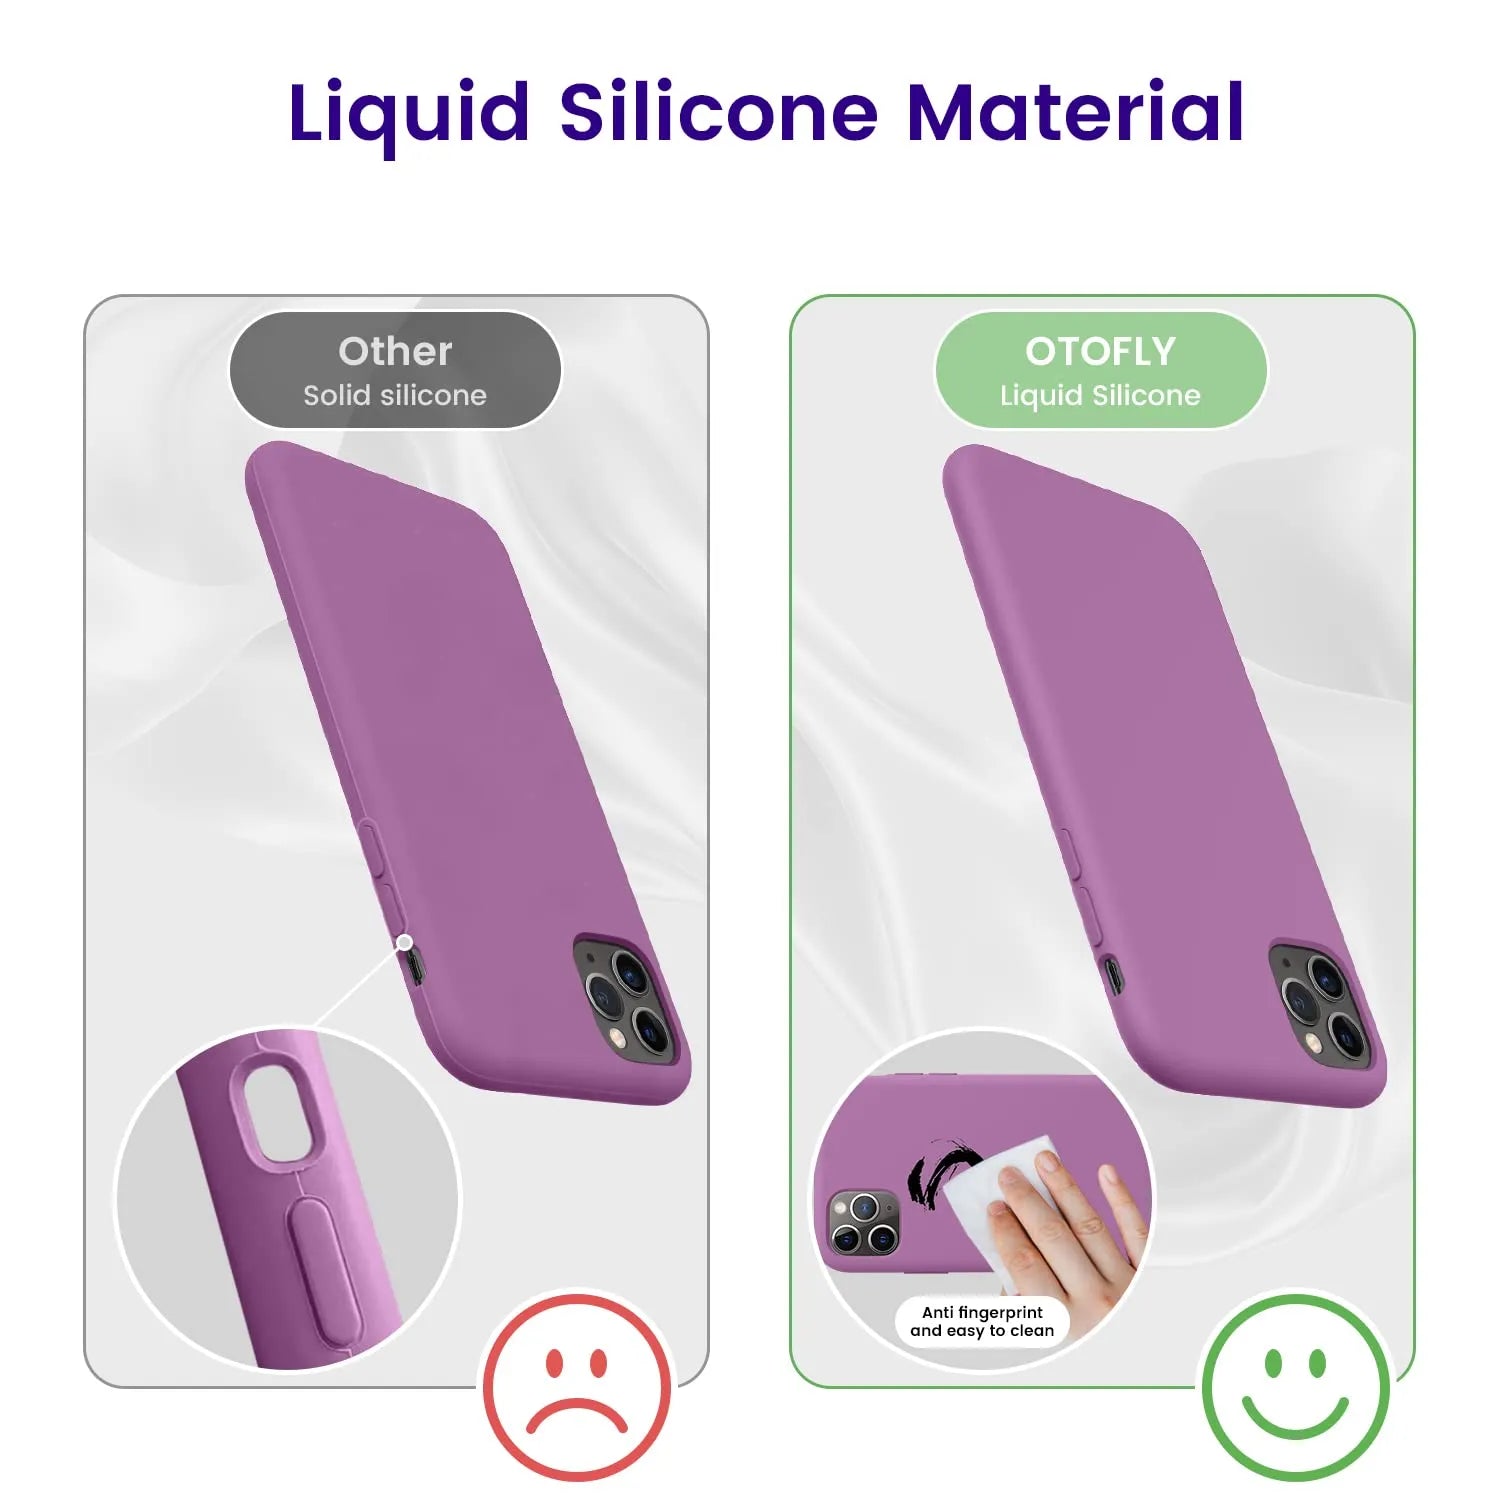 Purple iPhone Case for iPhone 11/ iPhone 11 Pro/ iPhone 11 Pro 